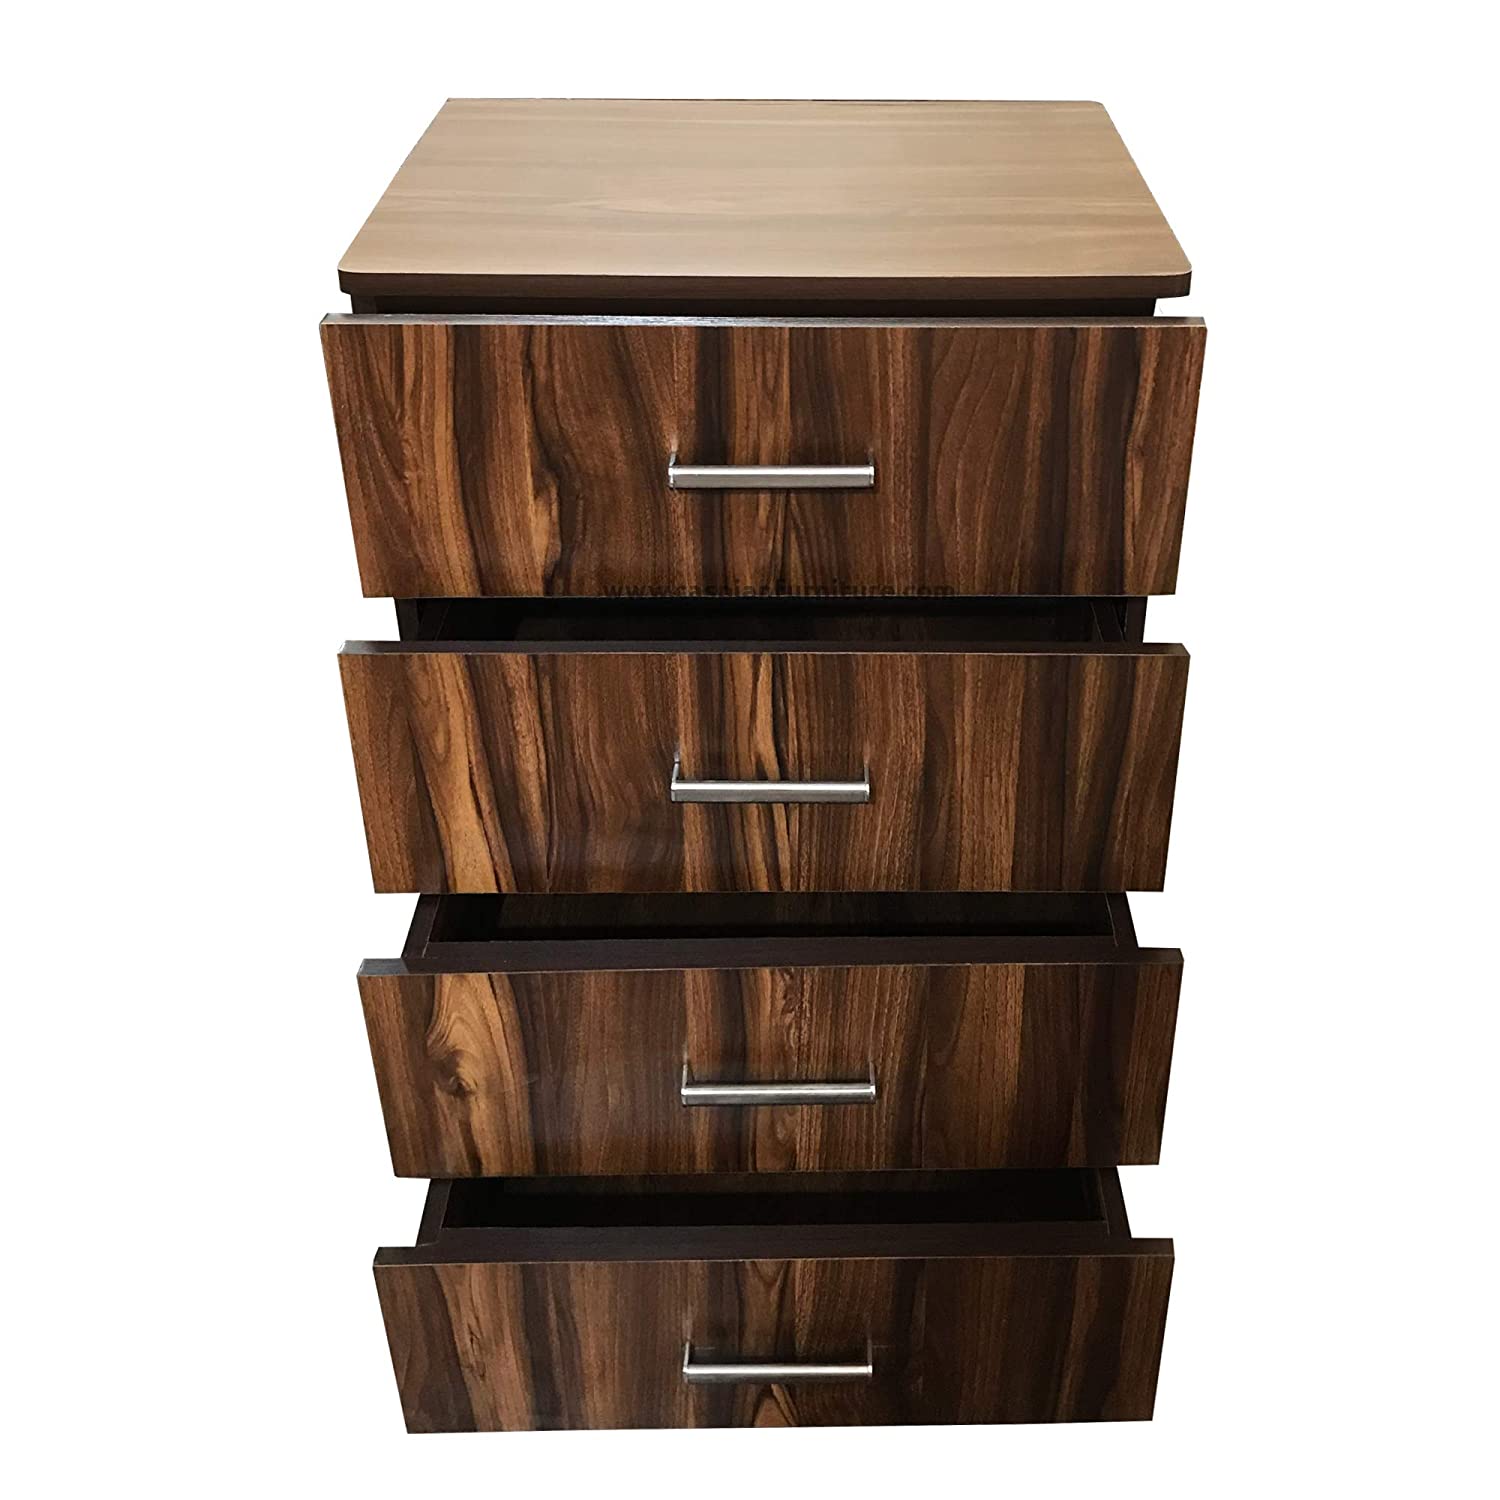 Engineered Wood Chest of Drawers for Home | Multipurpose Filing Cabinet for Home/Office | Storage Drawers | (Brown)